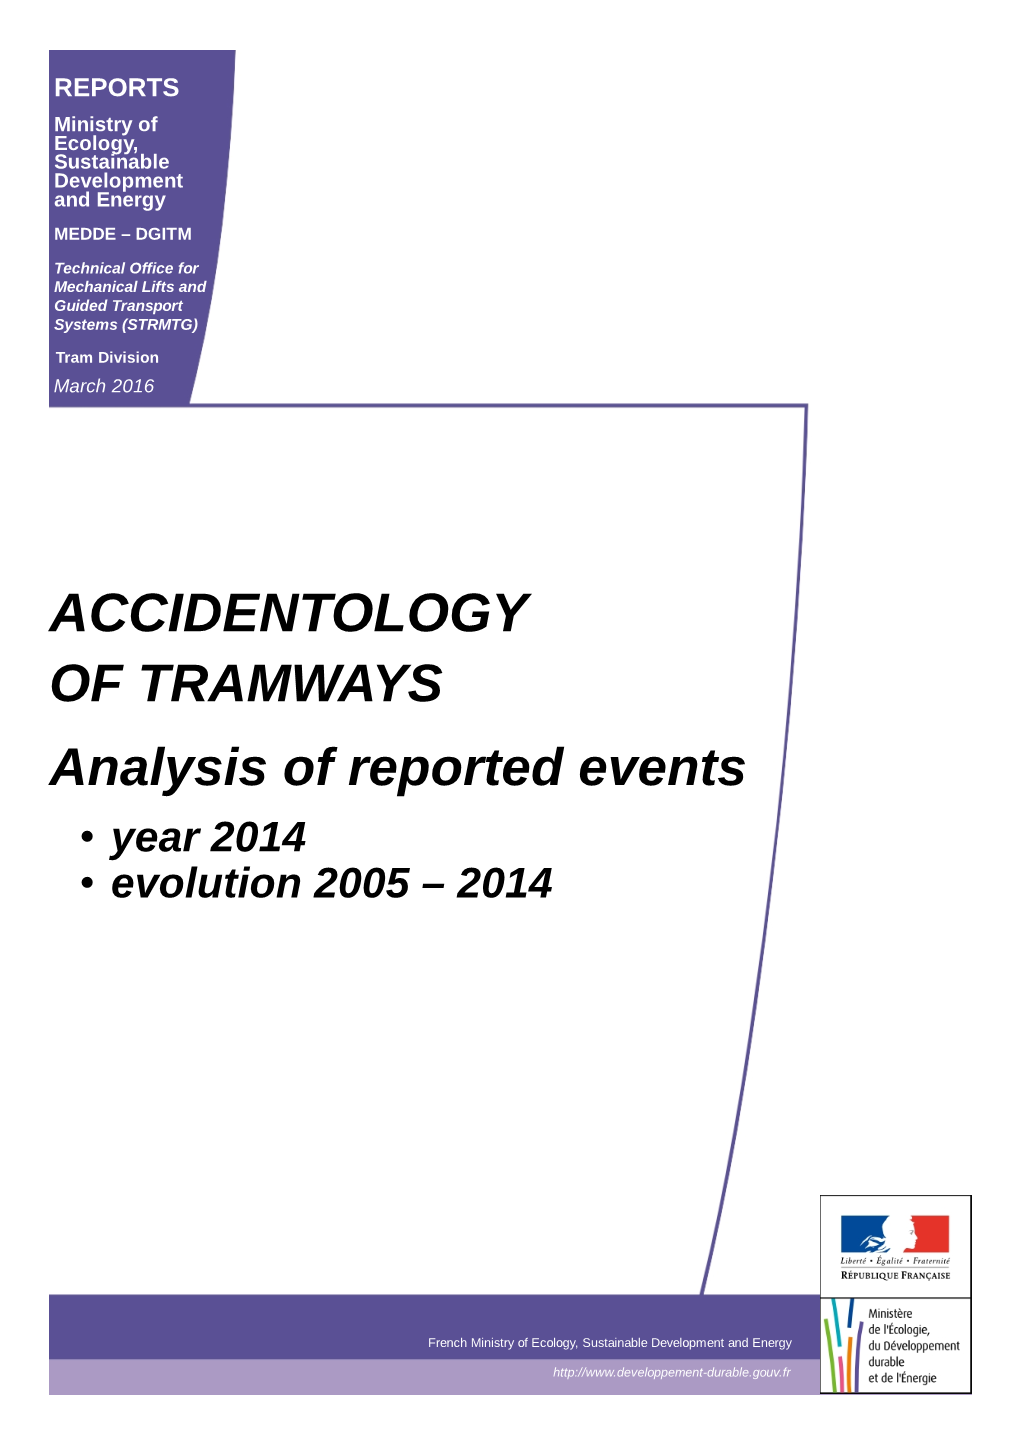 ACCIDENTOLOGY of TRAMWAYS Analysis of Reported Events • Year 2014 • Evolution 2005 – 2014